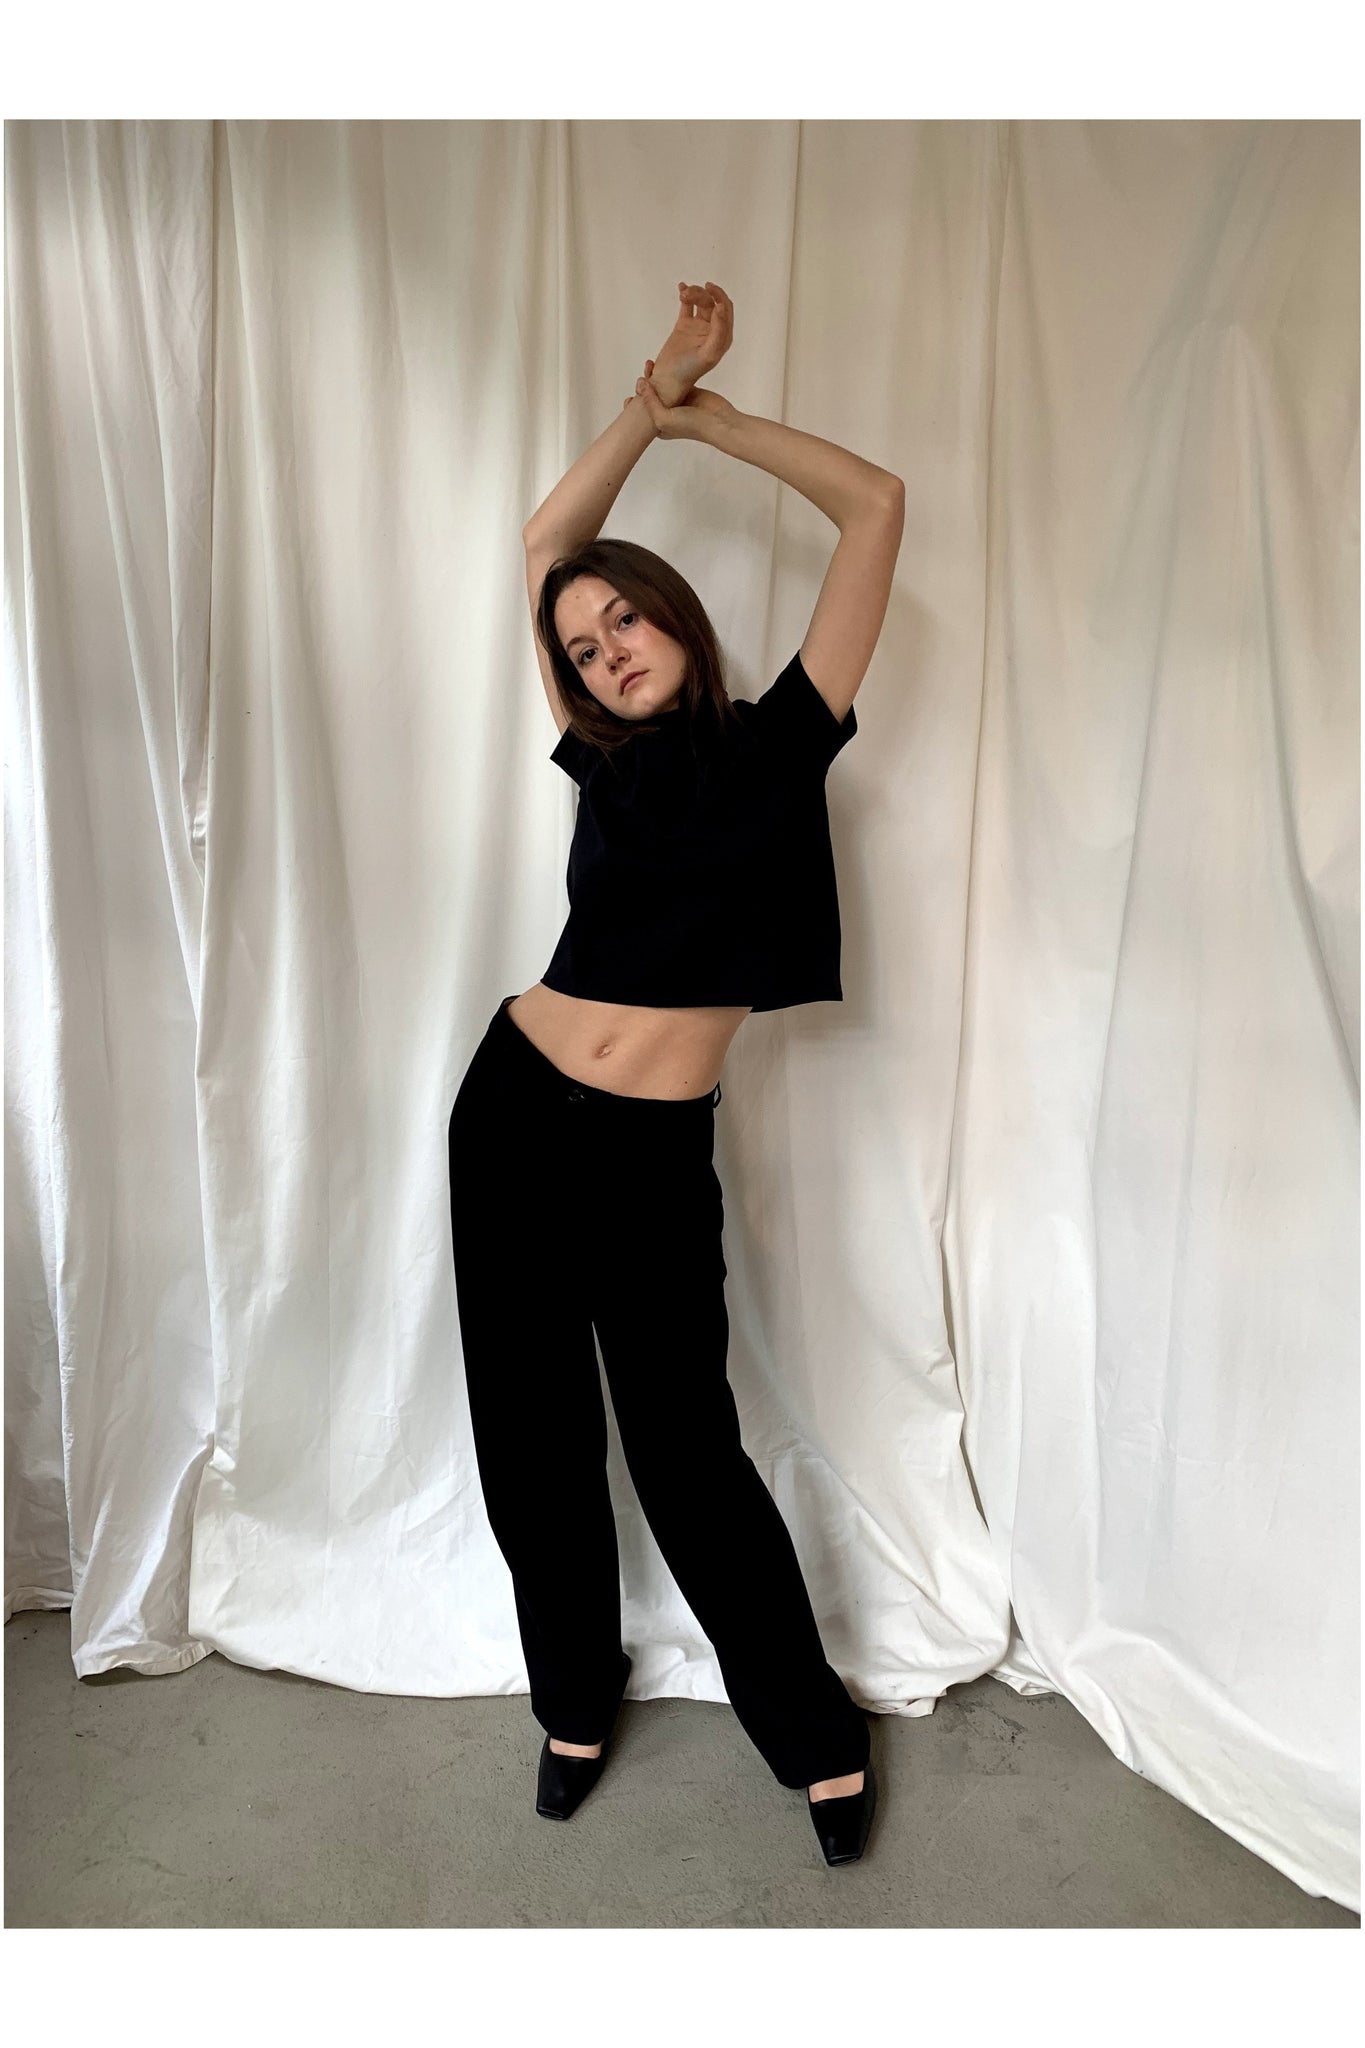 BLACK CROPPED MOCK TEE BY THE SEPT - BEYOND STUDIOS